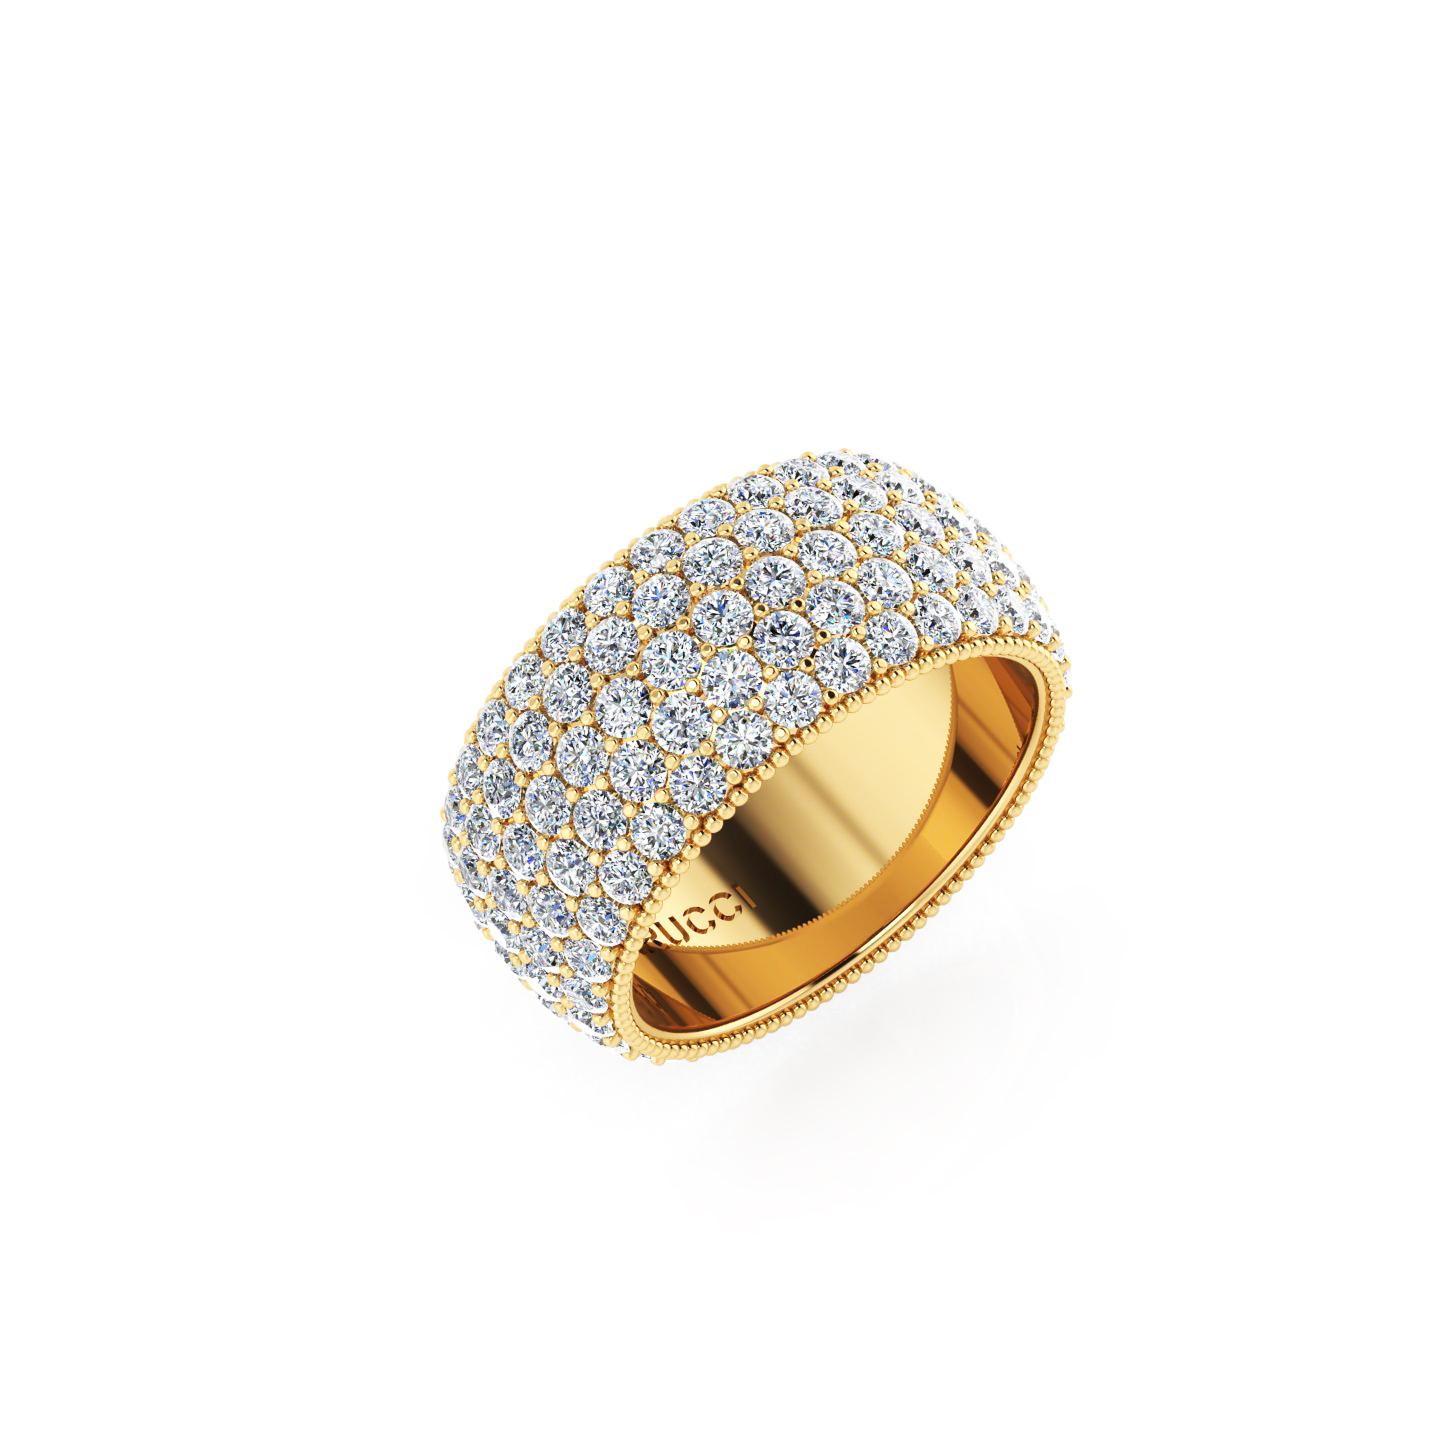 FERRUCCI Wide diamond pave' ring, with a slightly dome feeling, a wrap of sparkling white diamonds, G color, VS/SI1 clarity, for an approximate total carat weight of 4.70 carats, hand made in New York City with the best Italian craftsmanship,